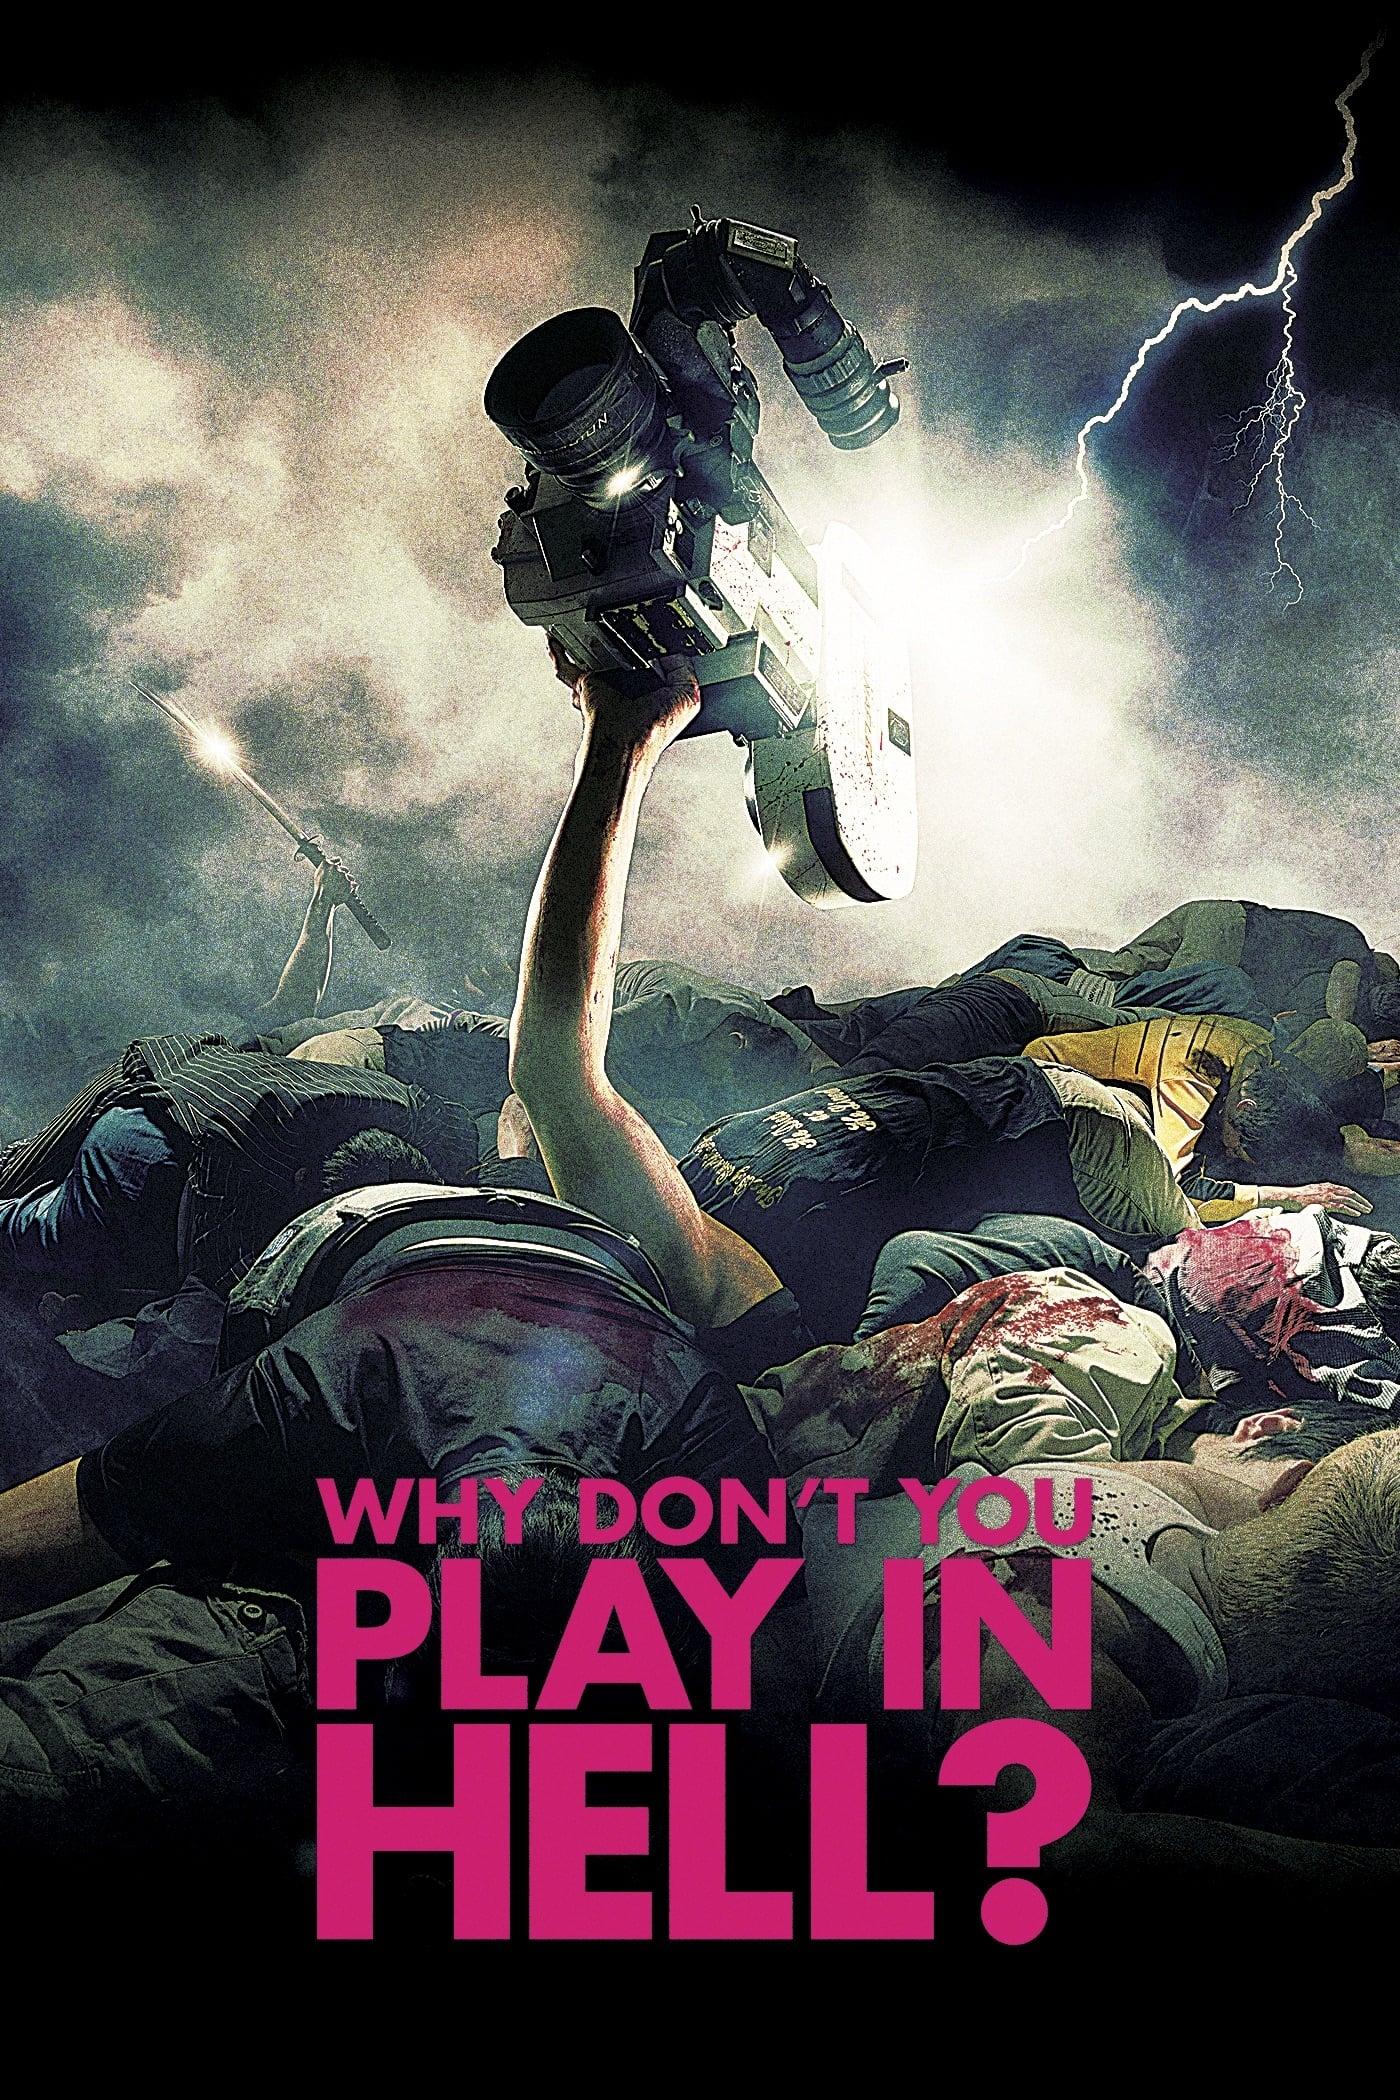 Why Don't You Play in Hell? poster